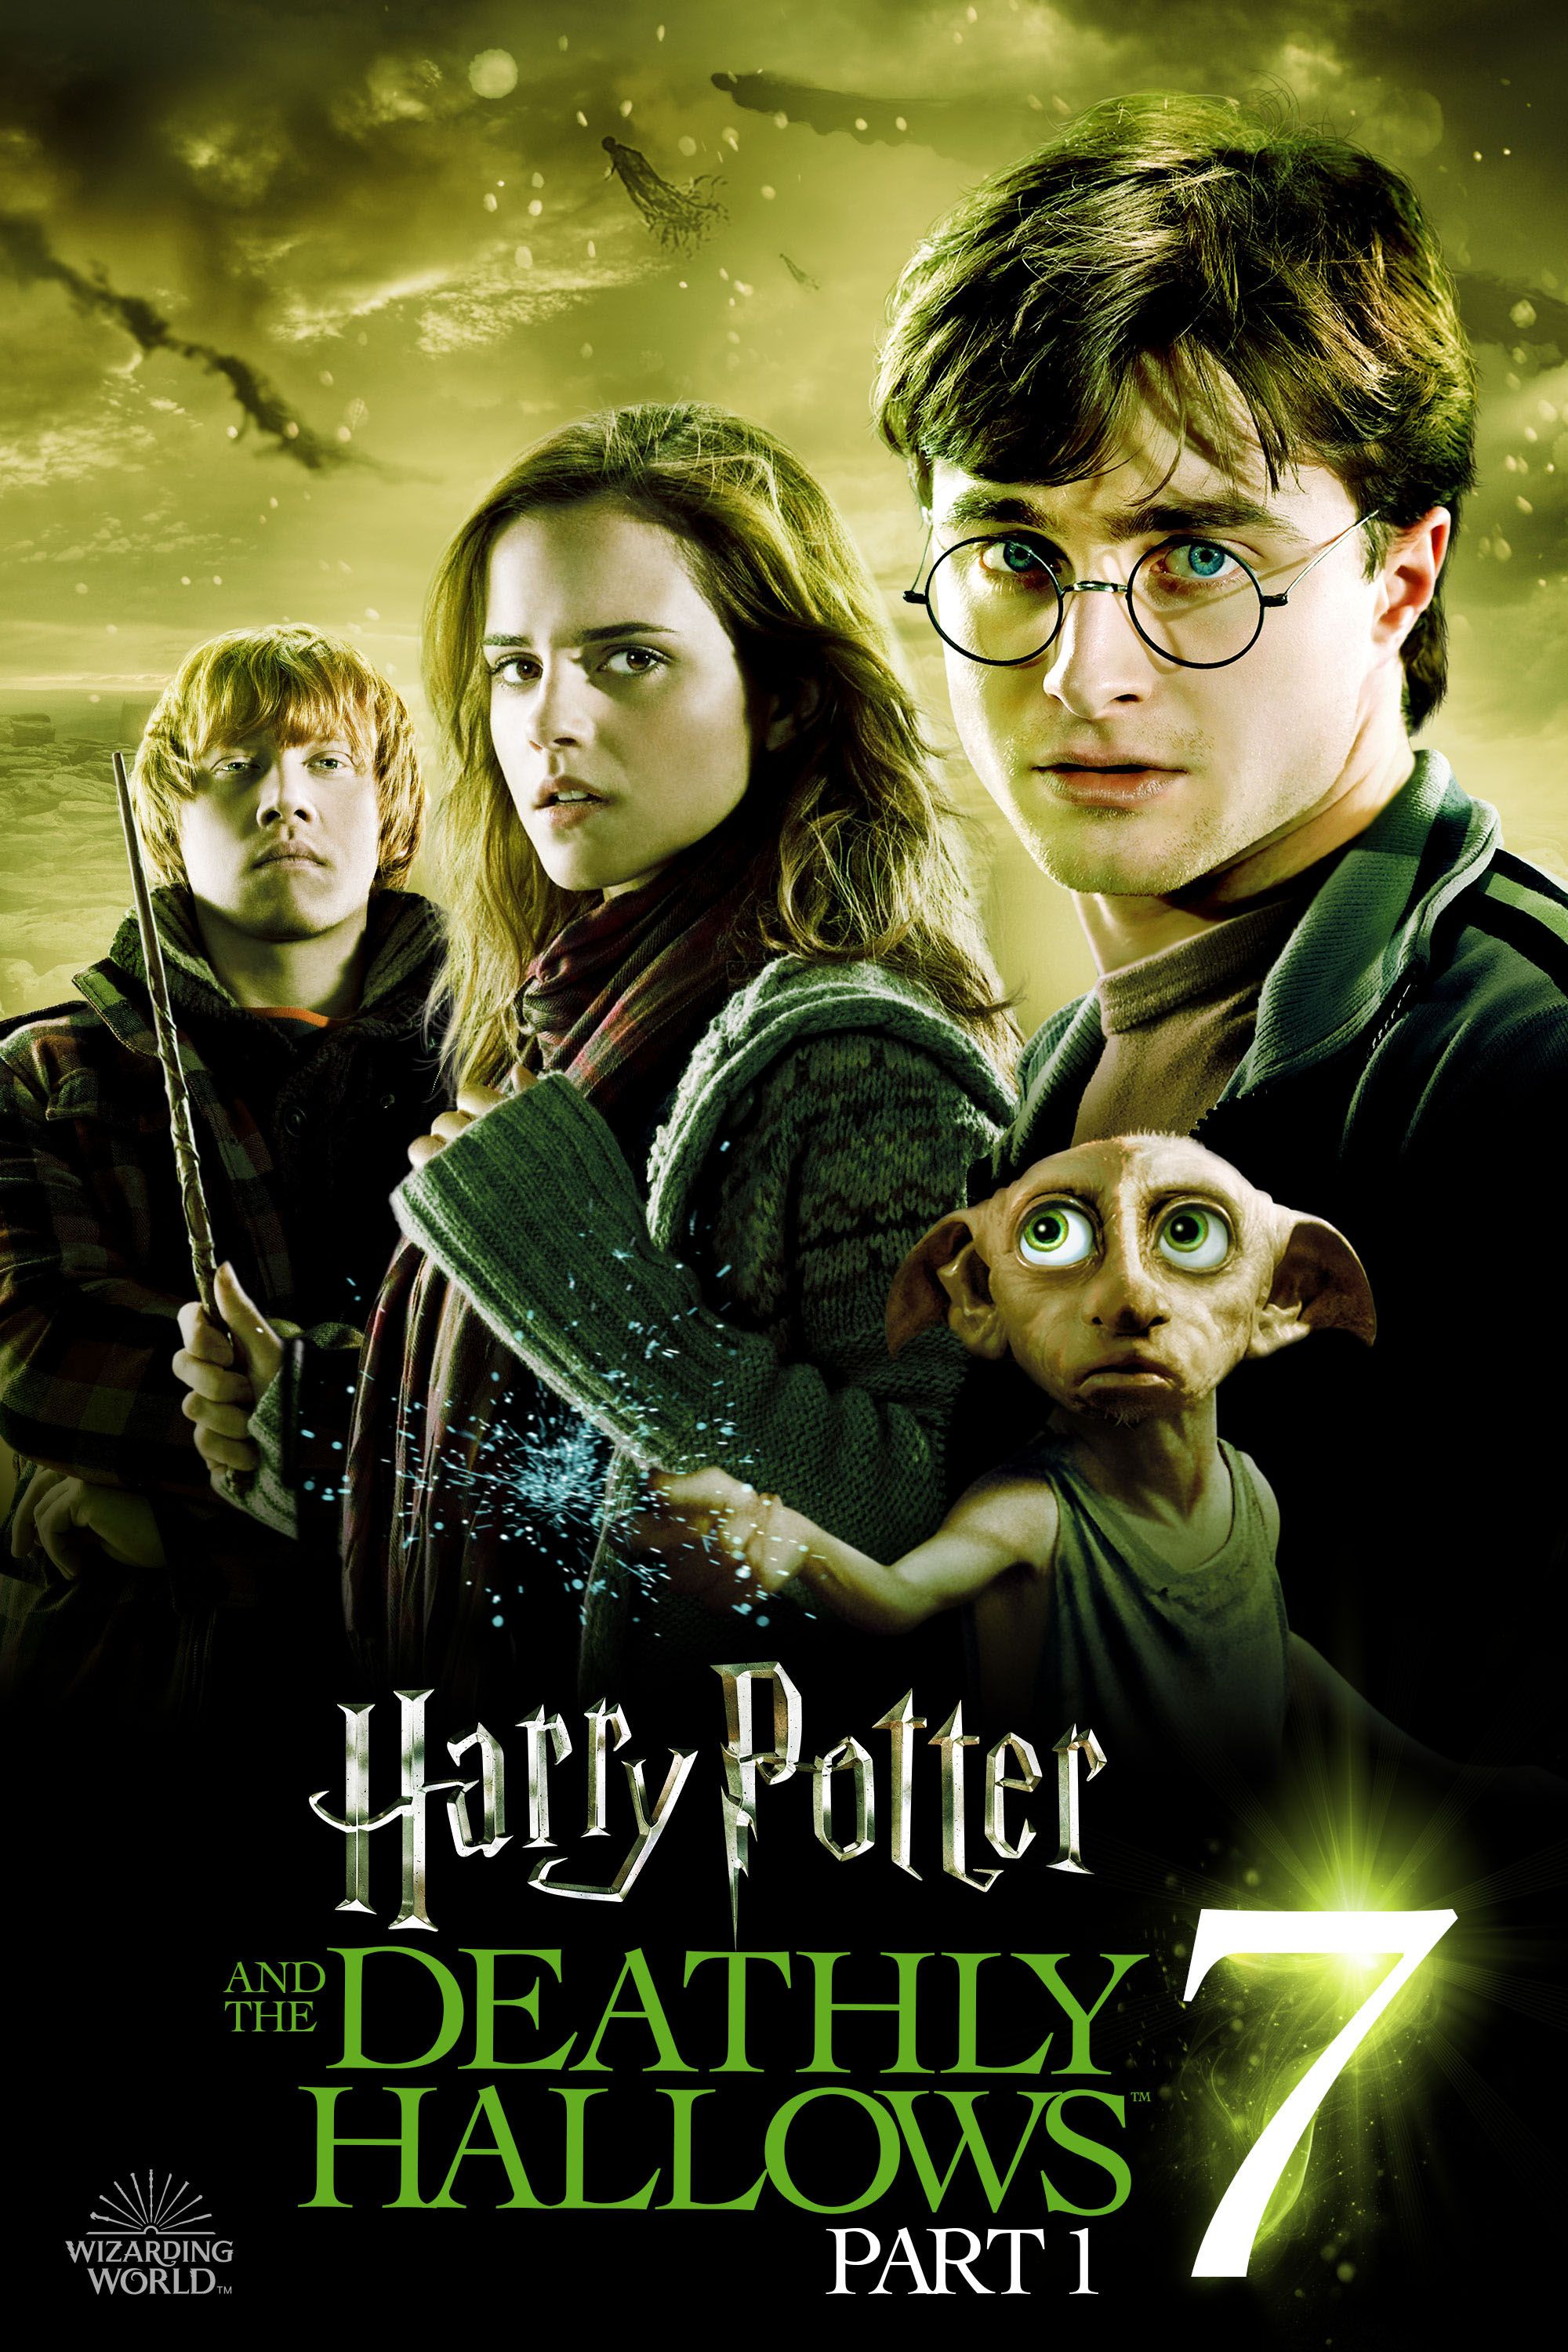 Harry Potter and the Deathly Hallows: Part 1 2010 Part 07 ORG Hindi Dual Audio 1080p | 720p | 480p BluRay ESub Download